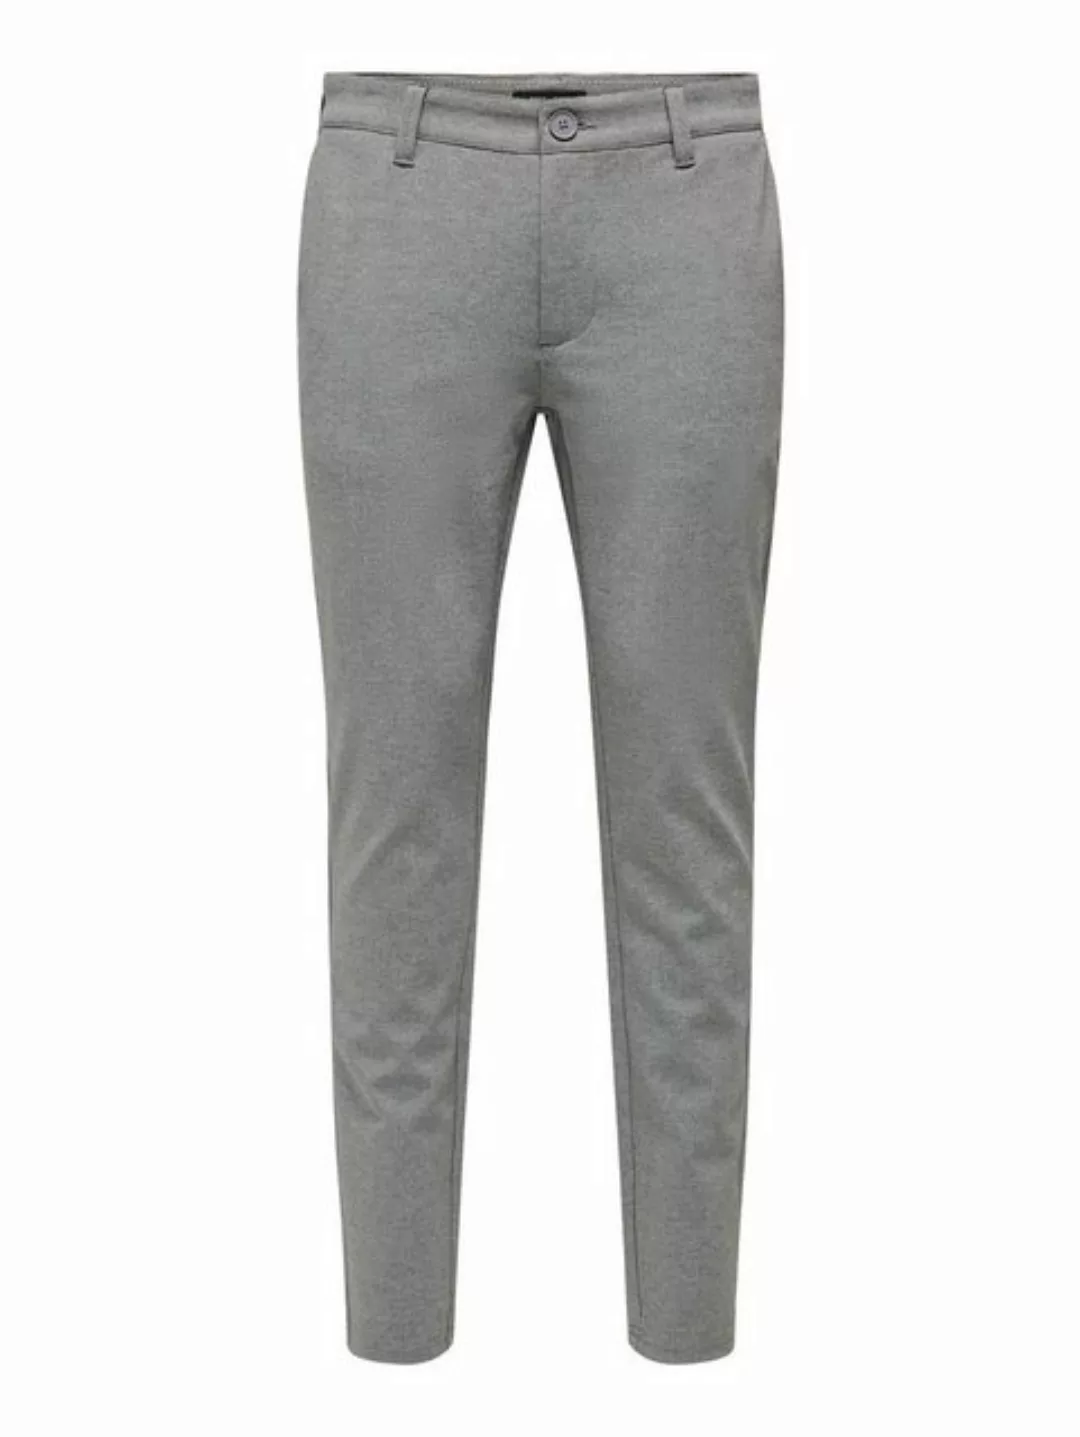 ONLY & SONS Chinohose Elegante Stoffhose Stretch Chino Pants Business ONSTH günstig online kaufen